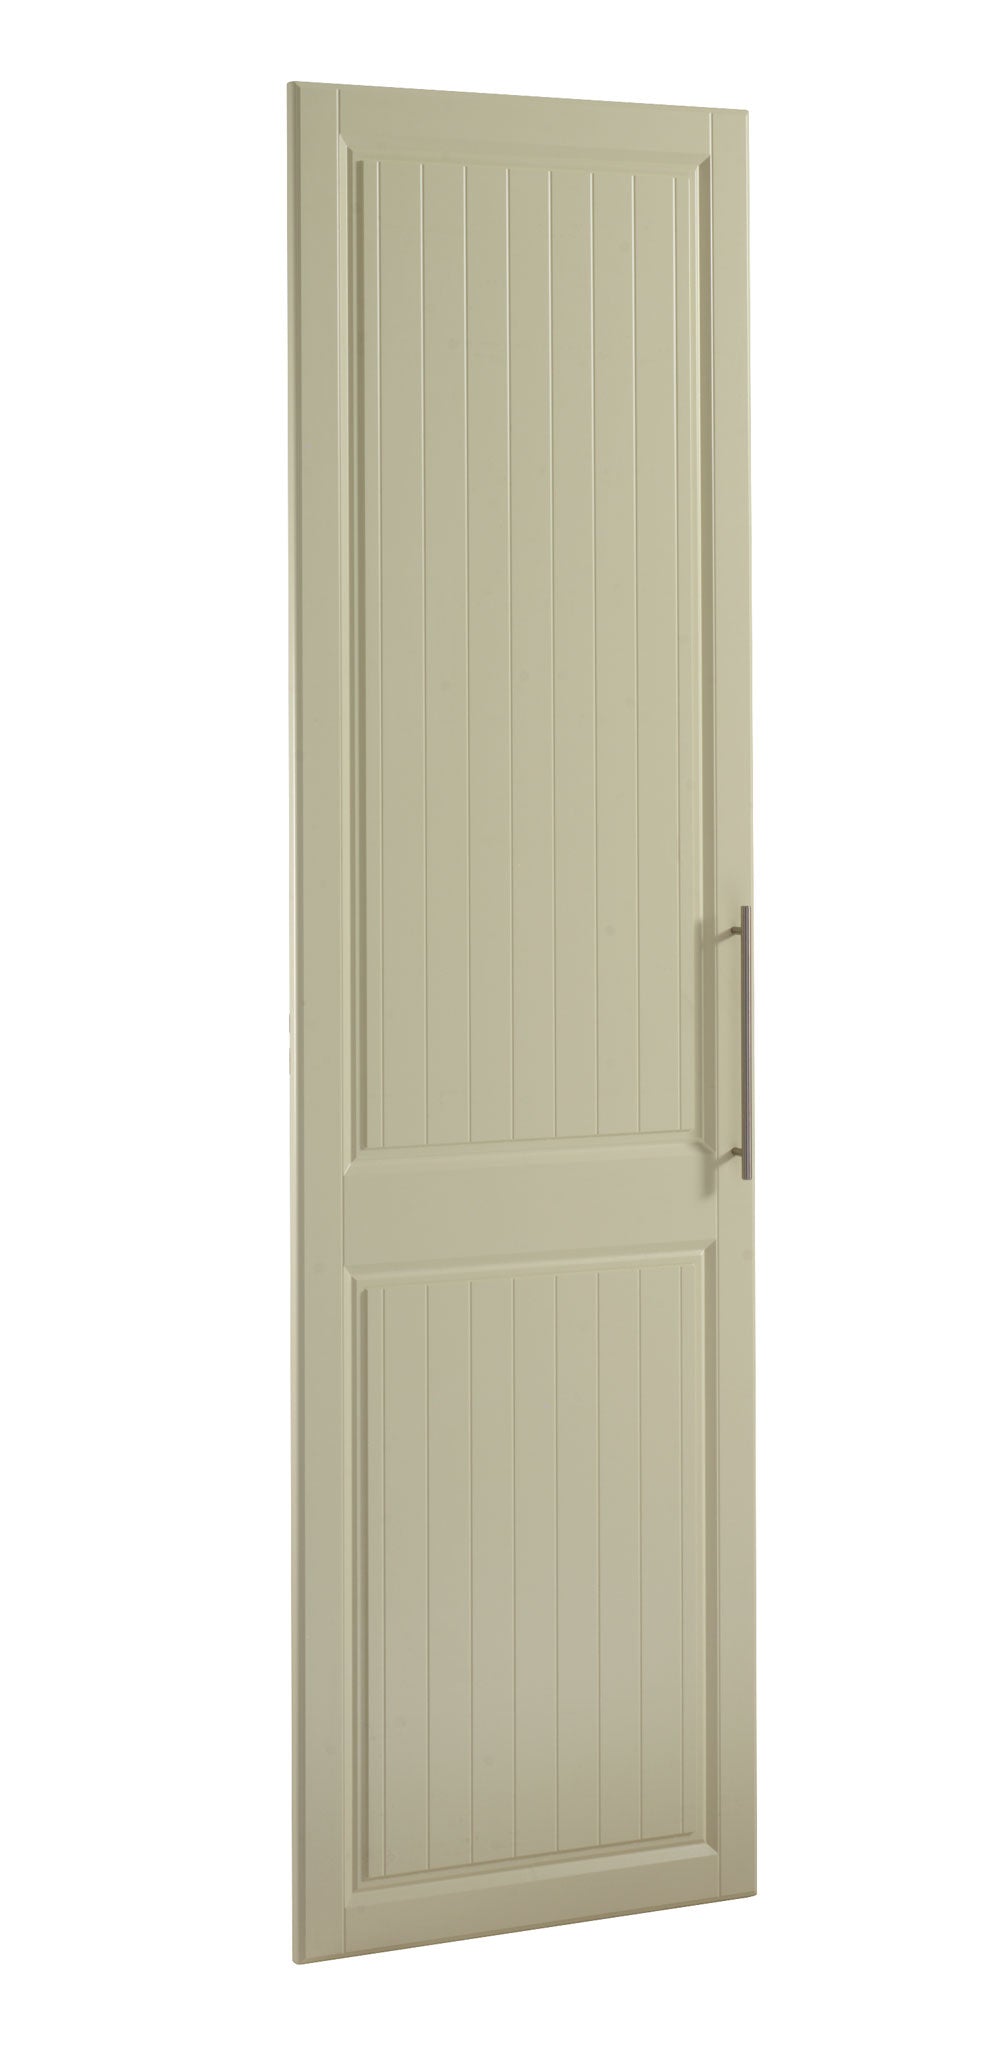 Made to measure Willingdale doors in RAL colour